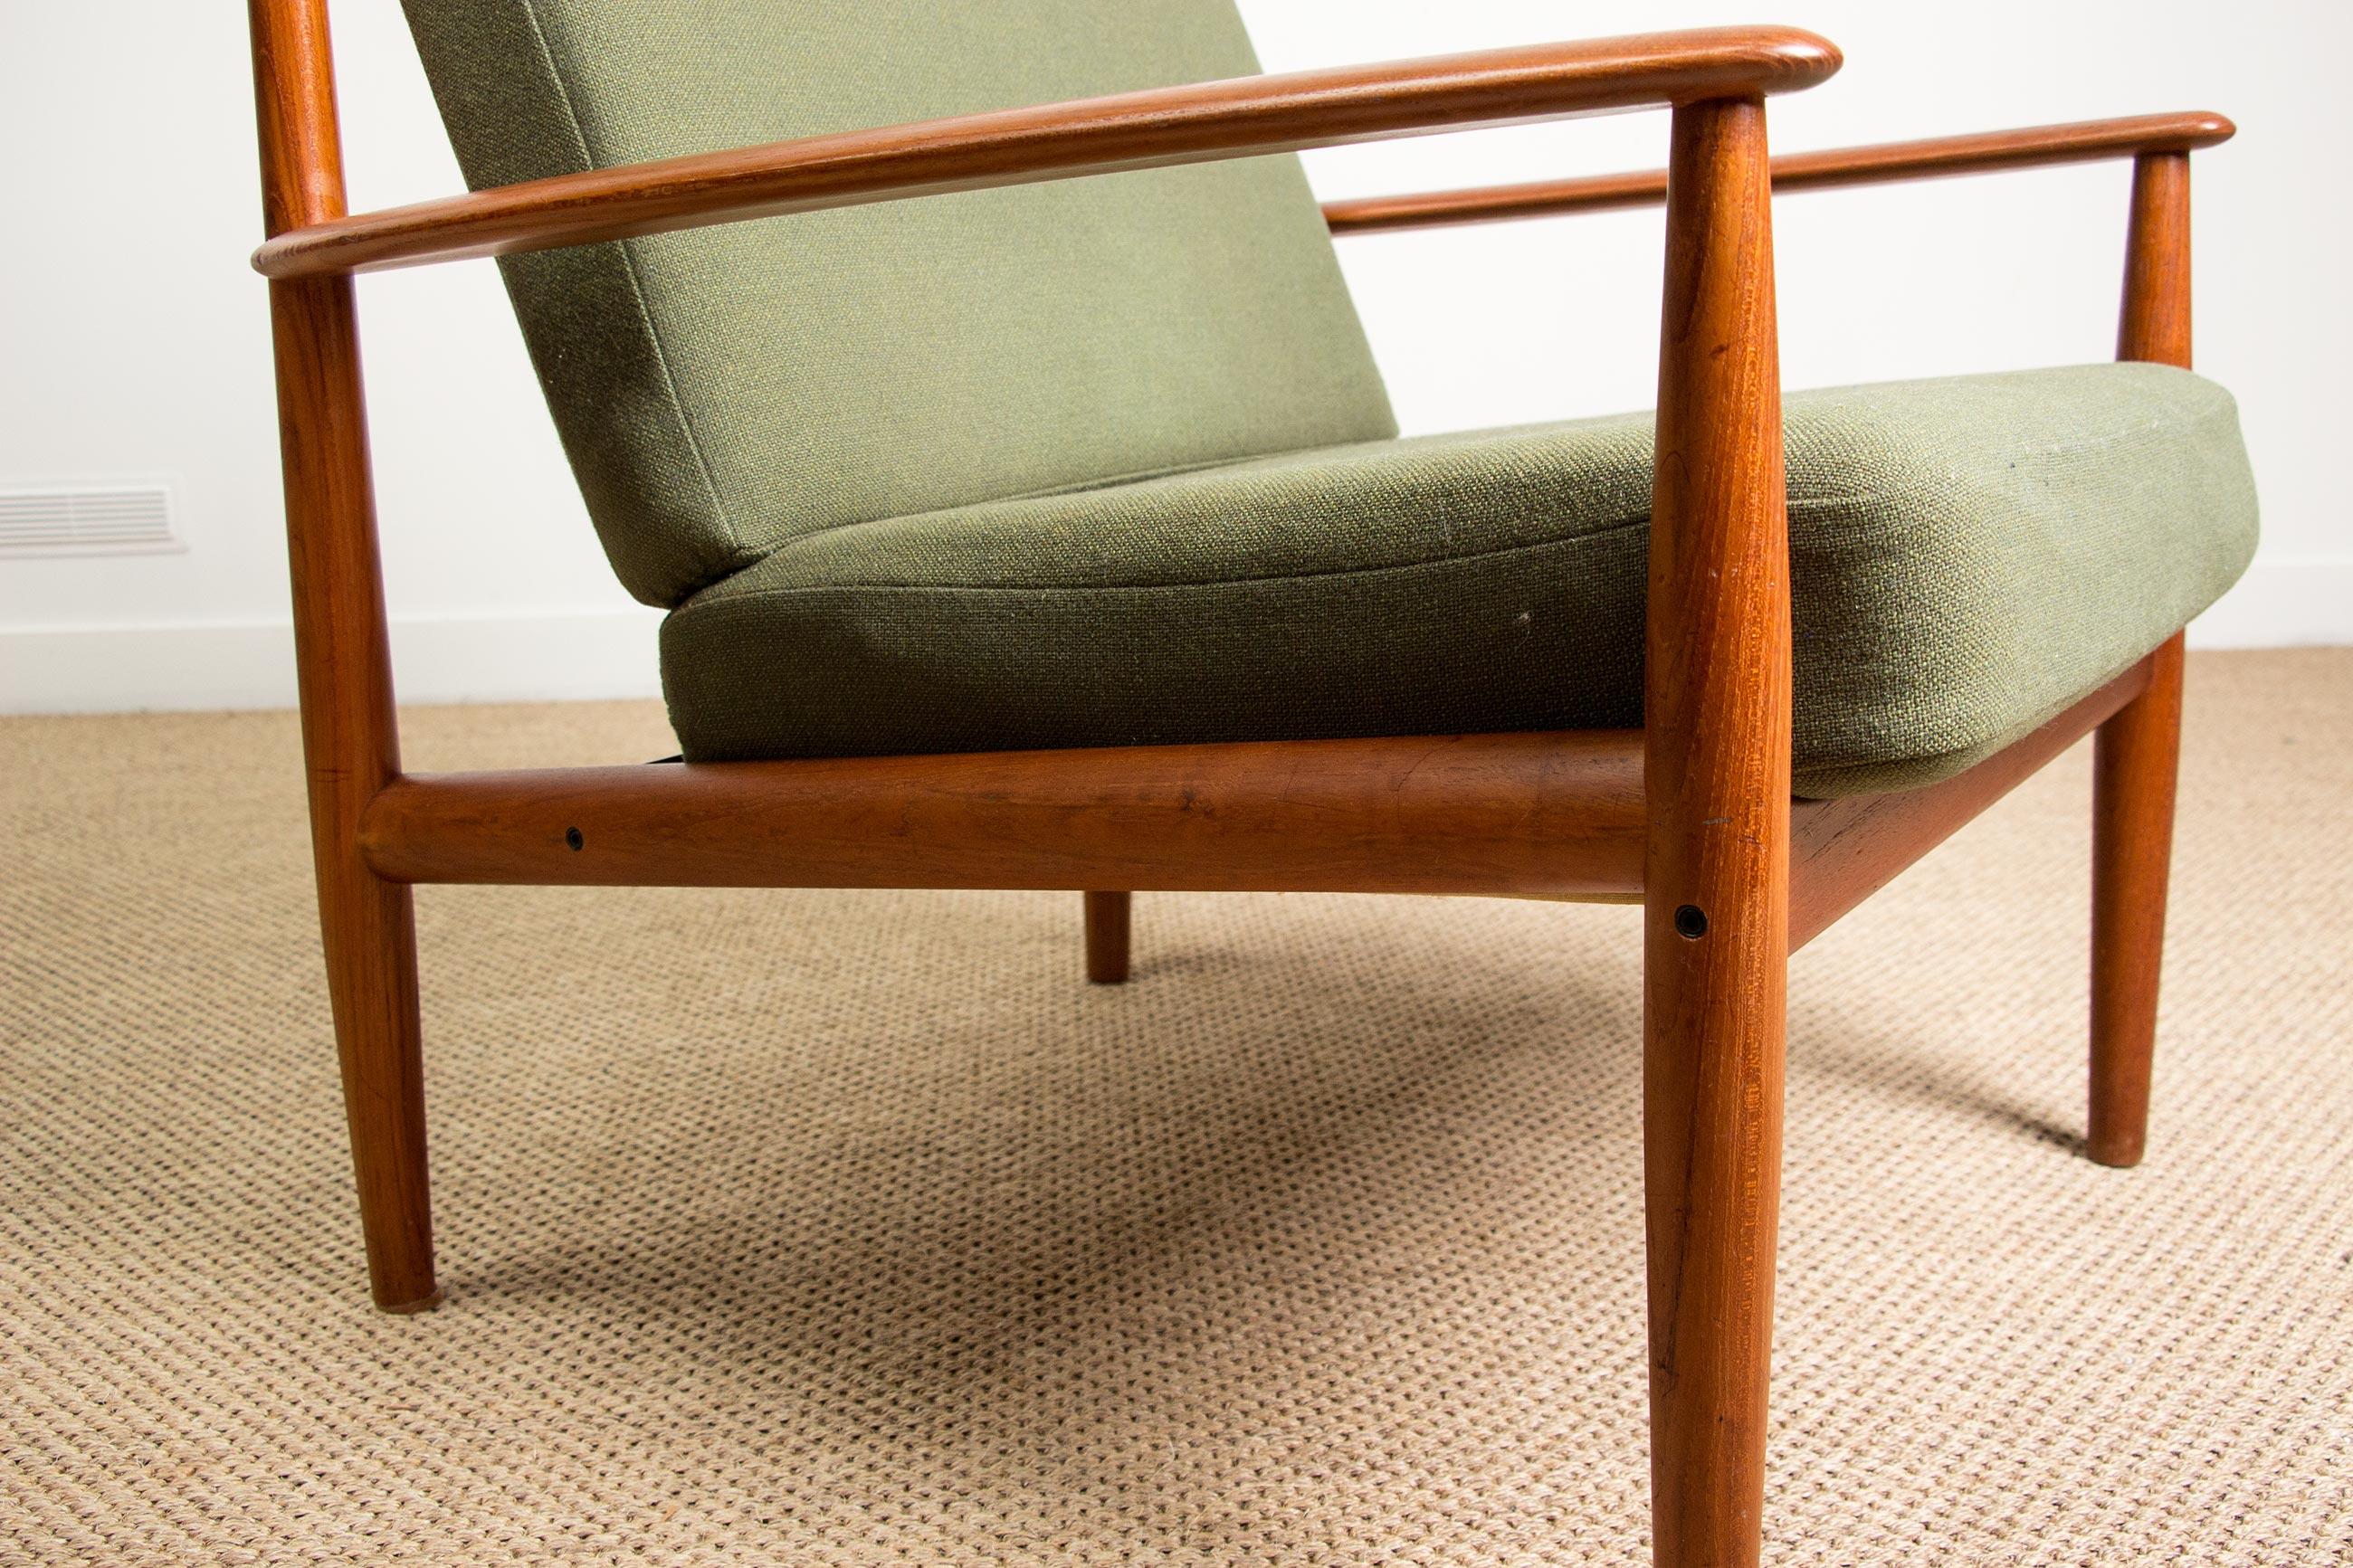 Mid-20th Century Danish Teak and Fabric Armchair Model 128 by Grete Jalk for France & Son, 1960